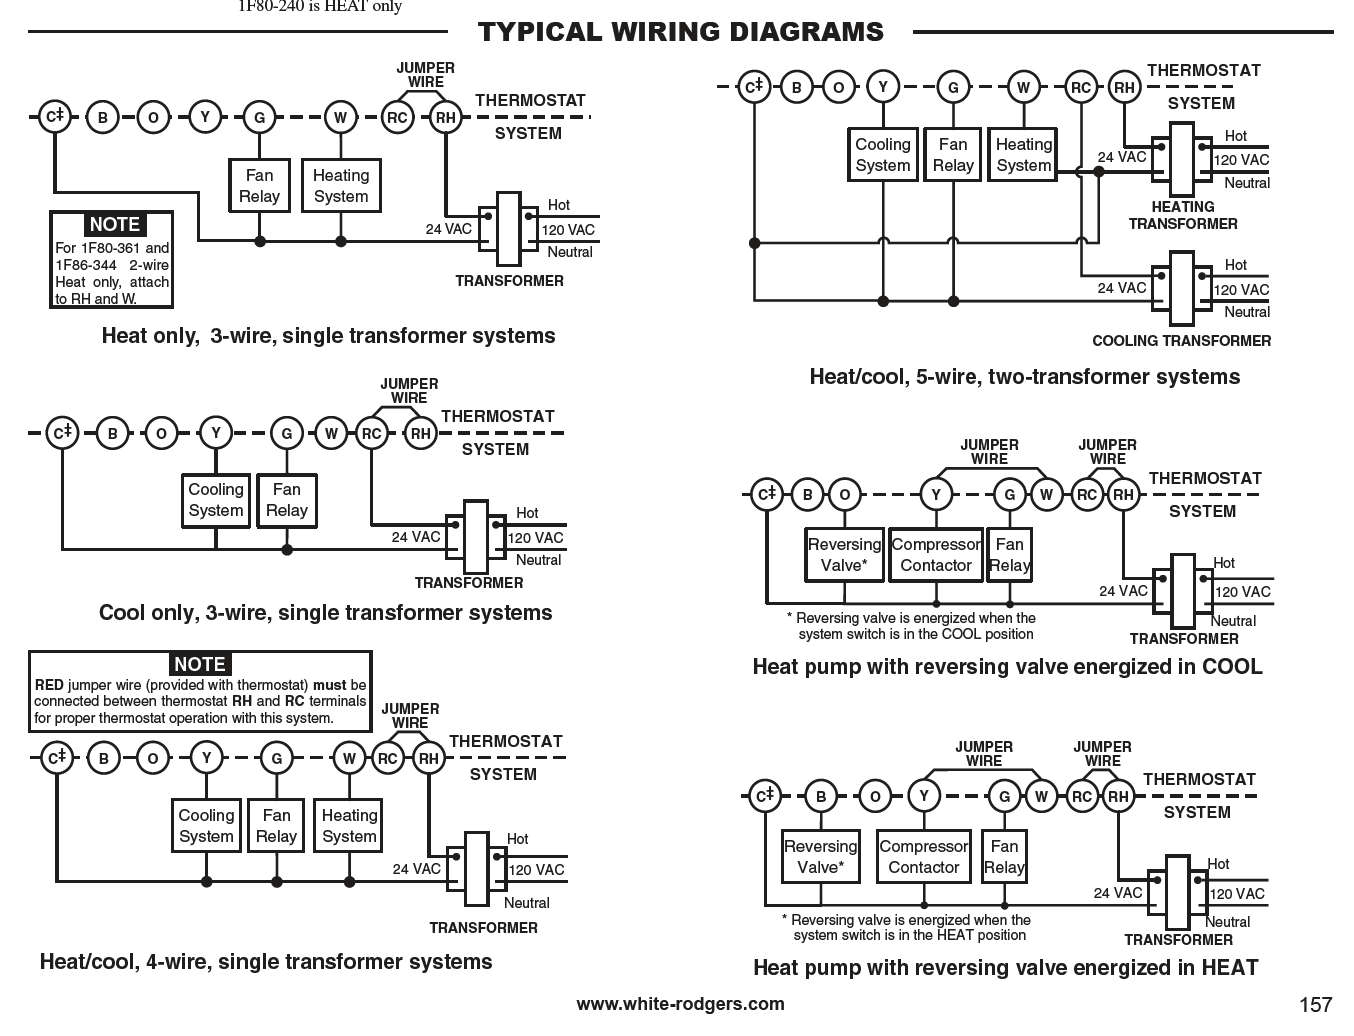 White Rodgers Thermostat Wiring Diagram - Cadician's Blog